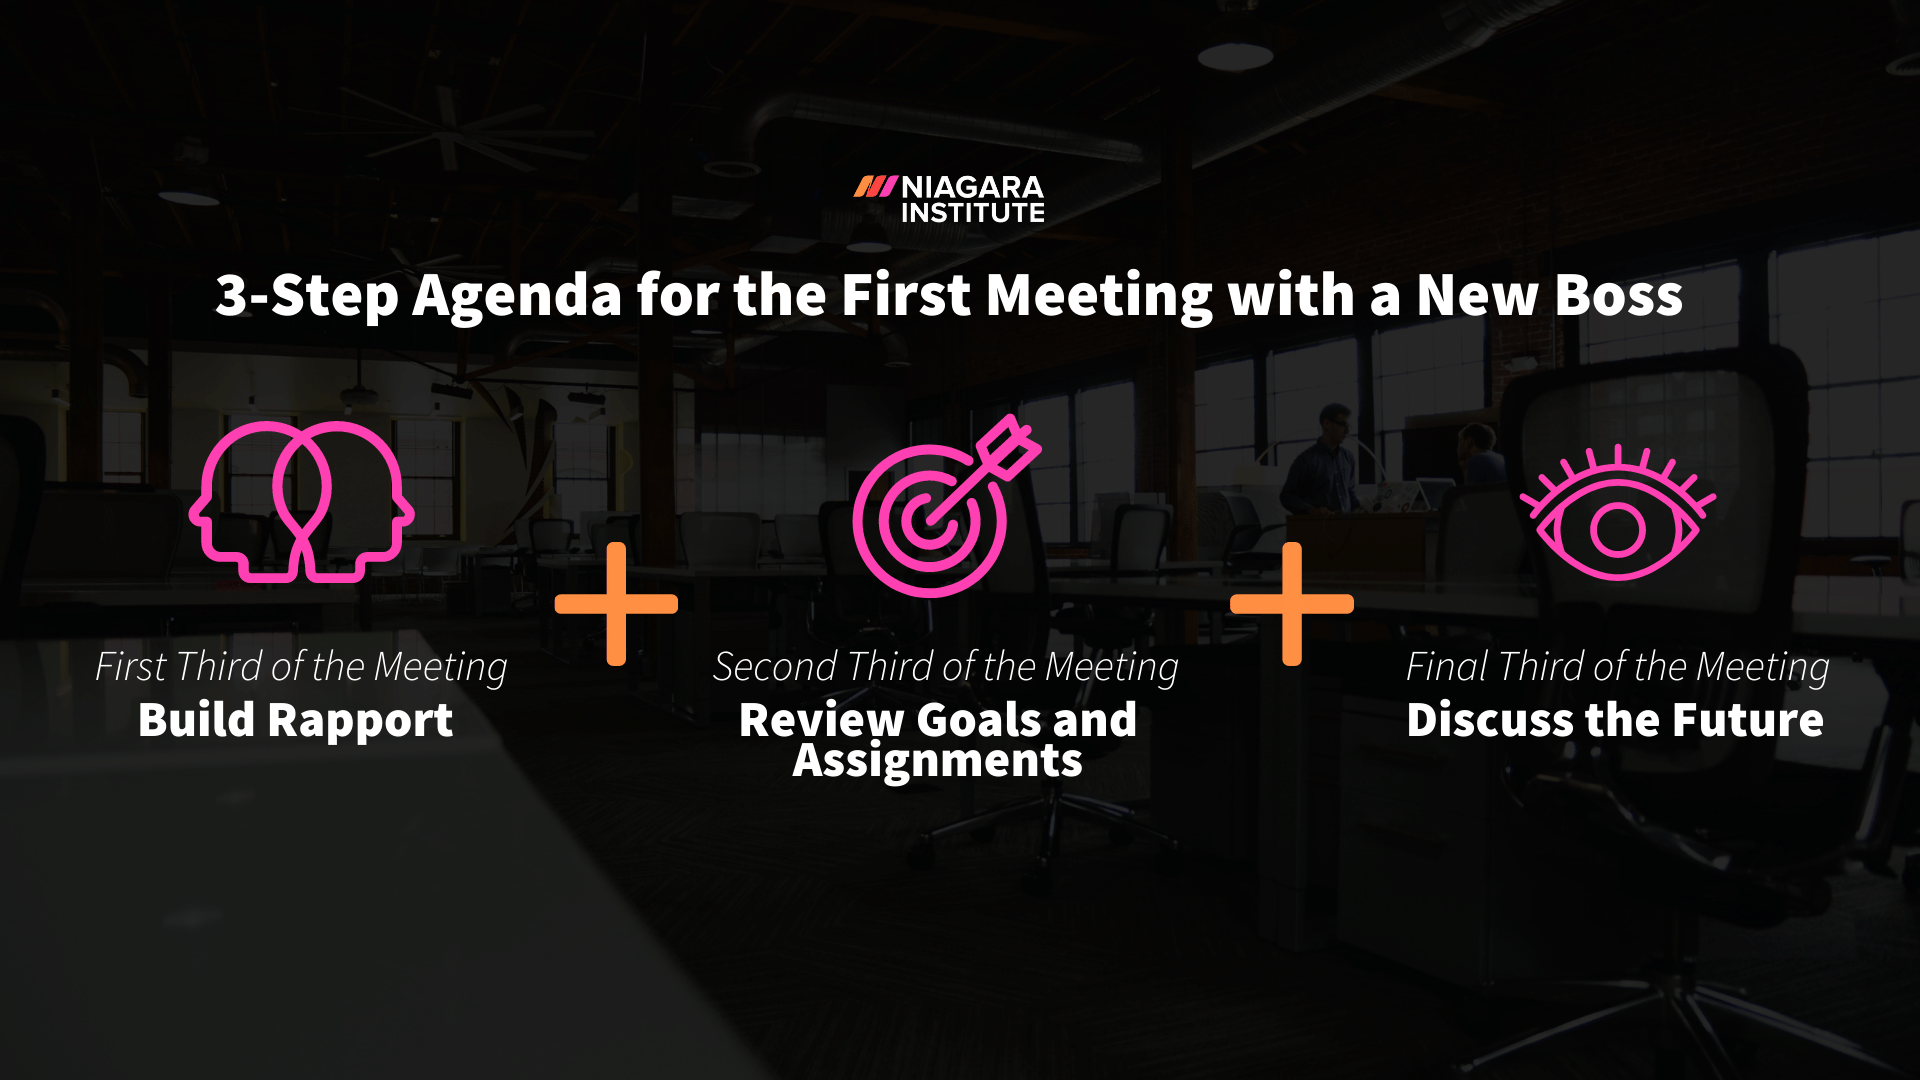 3-Step Agenda for the First Meeting with a New Boss